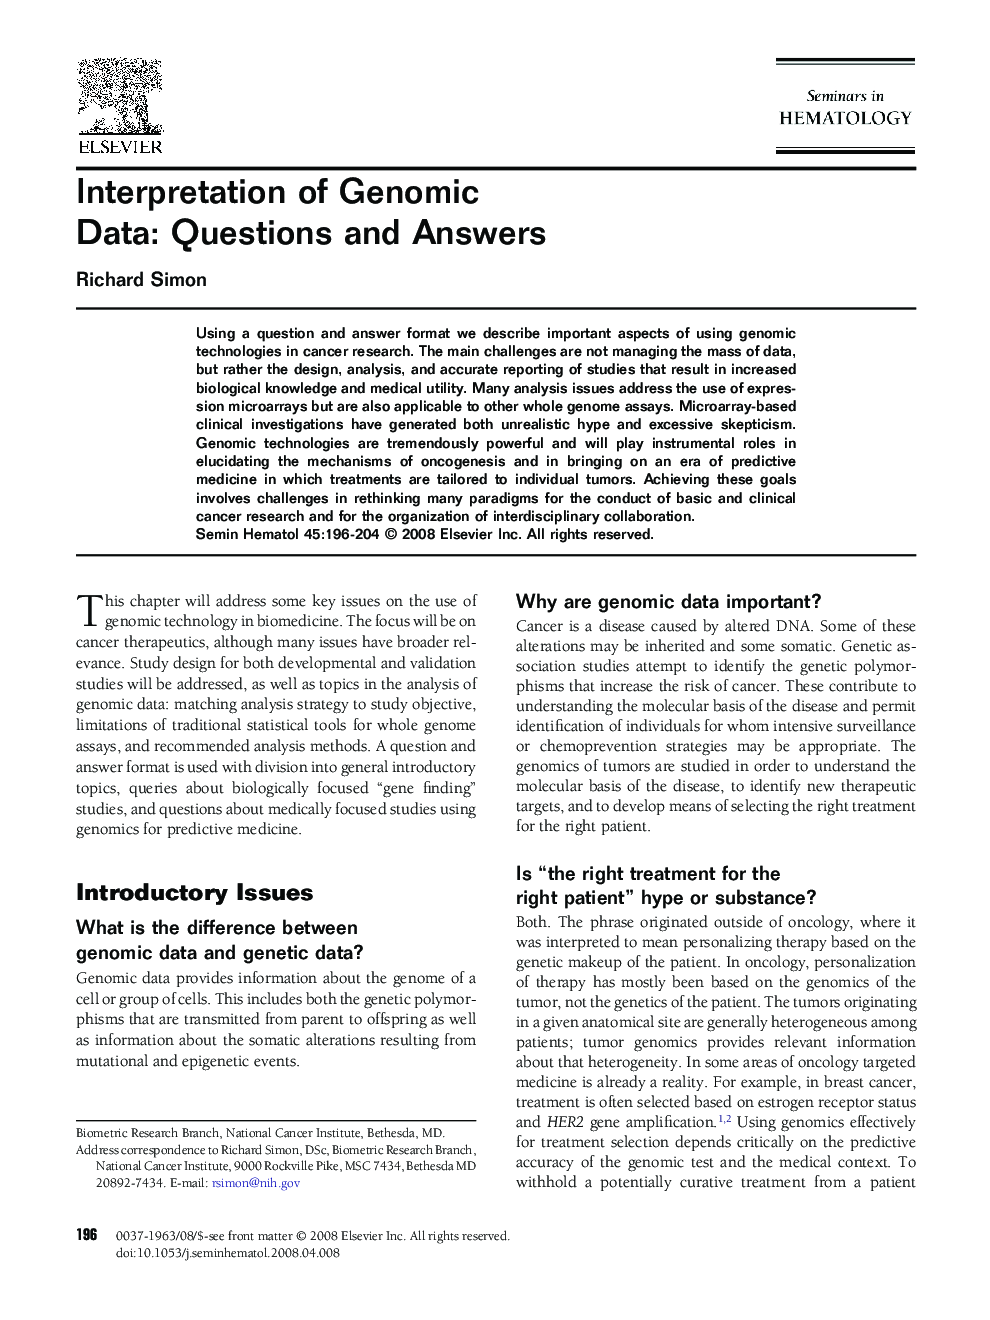 Interpretation of Genomic Data: Questions and Answers